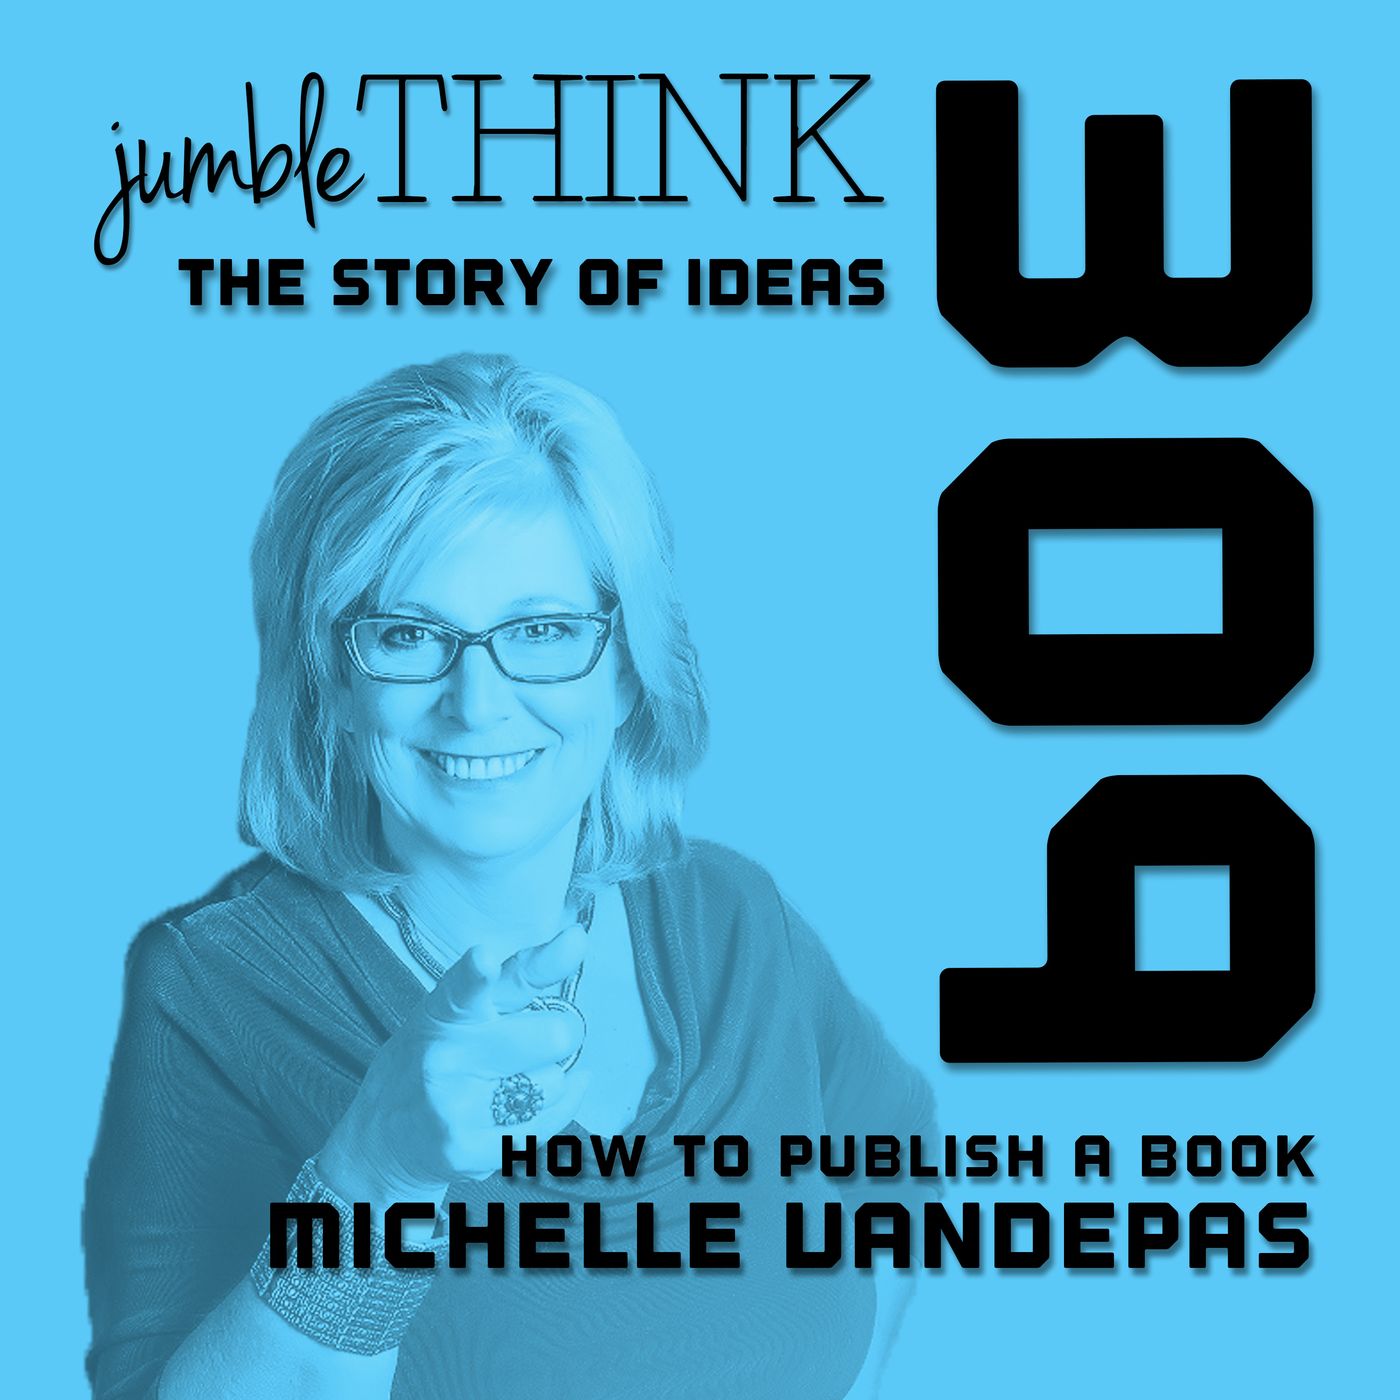 How to Publish a Book with Michelle Vandepas